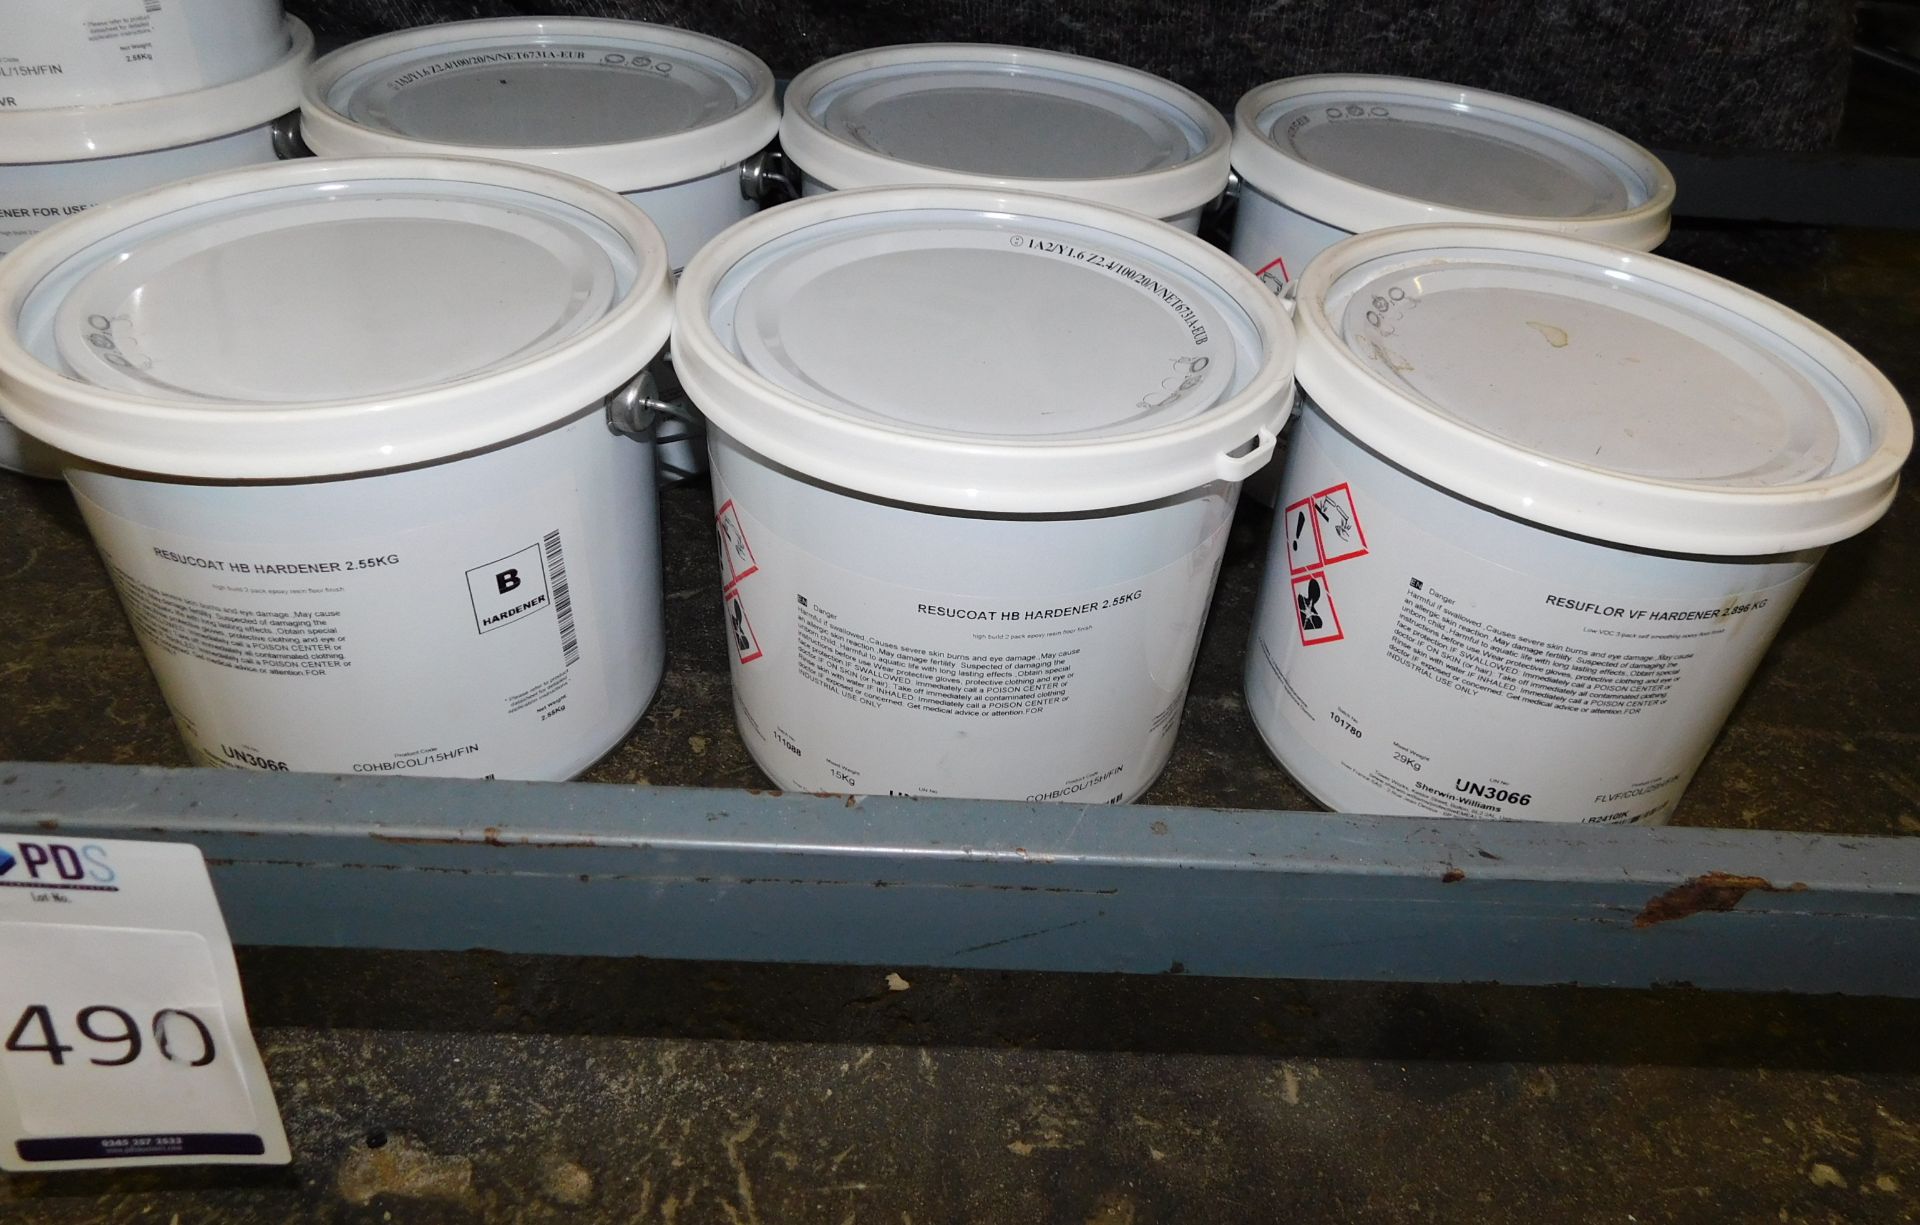 8 Tins Standard Colour Hardener for use with Resucoat HB 2.55kg, 4 Tins Resucoat HB Hardener 2. - Image 3 of 3